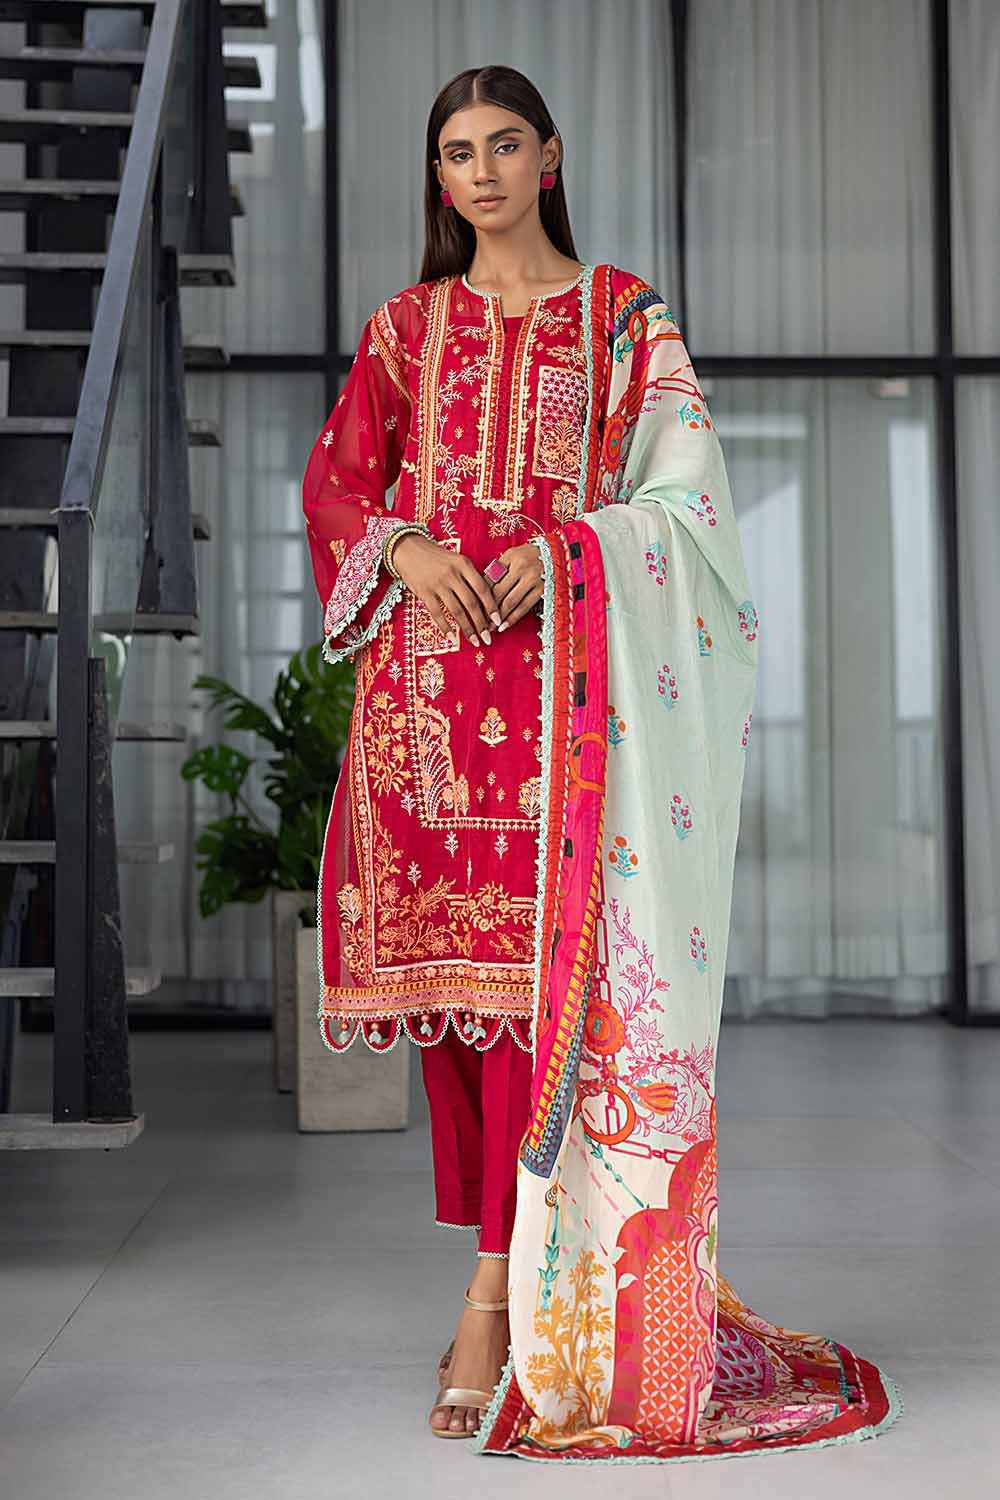 Gul Ahmed 3PC Embroidered Net Unstitched Suit with Digital Printed Silk Dupatta SSM-32006